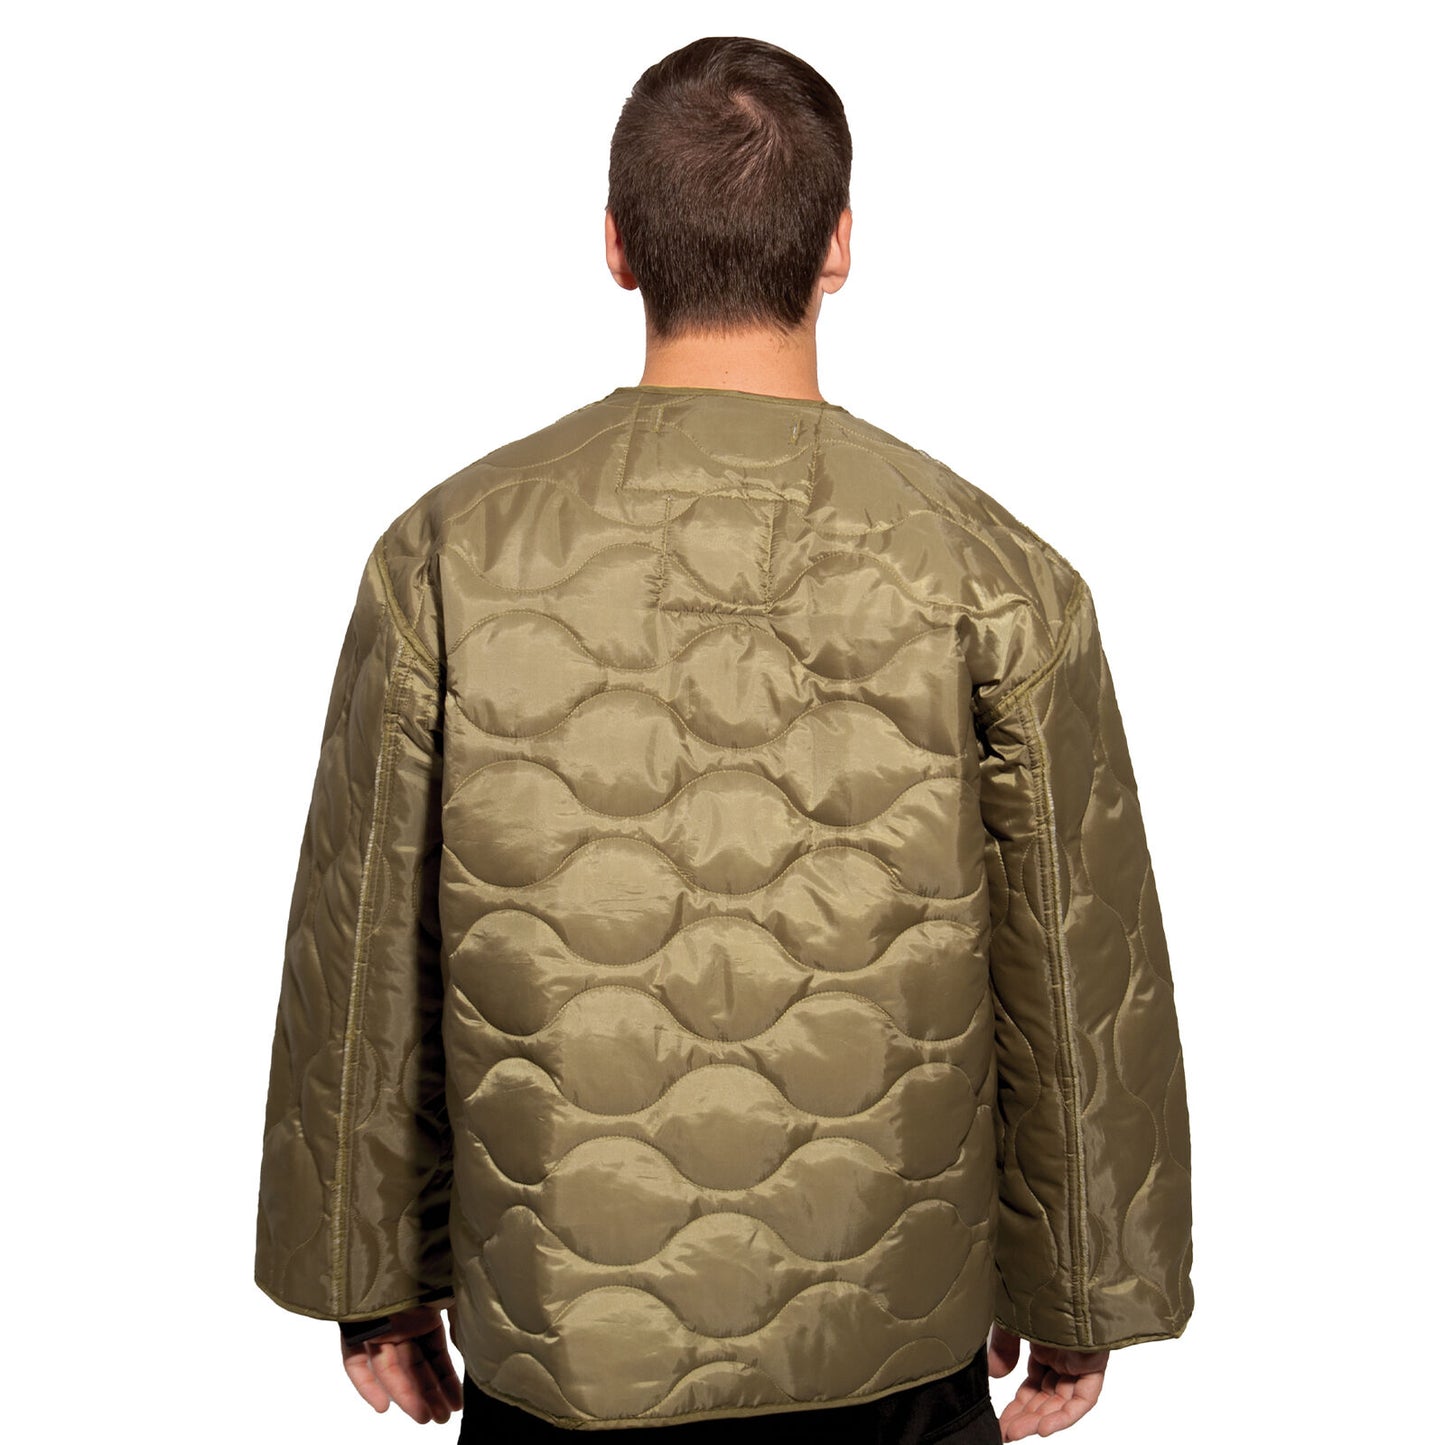 M-65 Field Jacket Liner in Coyote Brown - Insulated Quilted M65 Coat